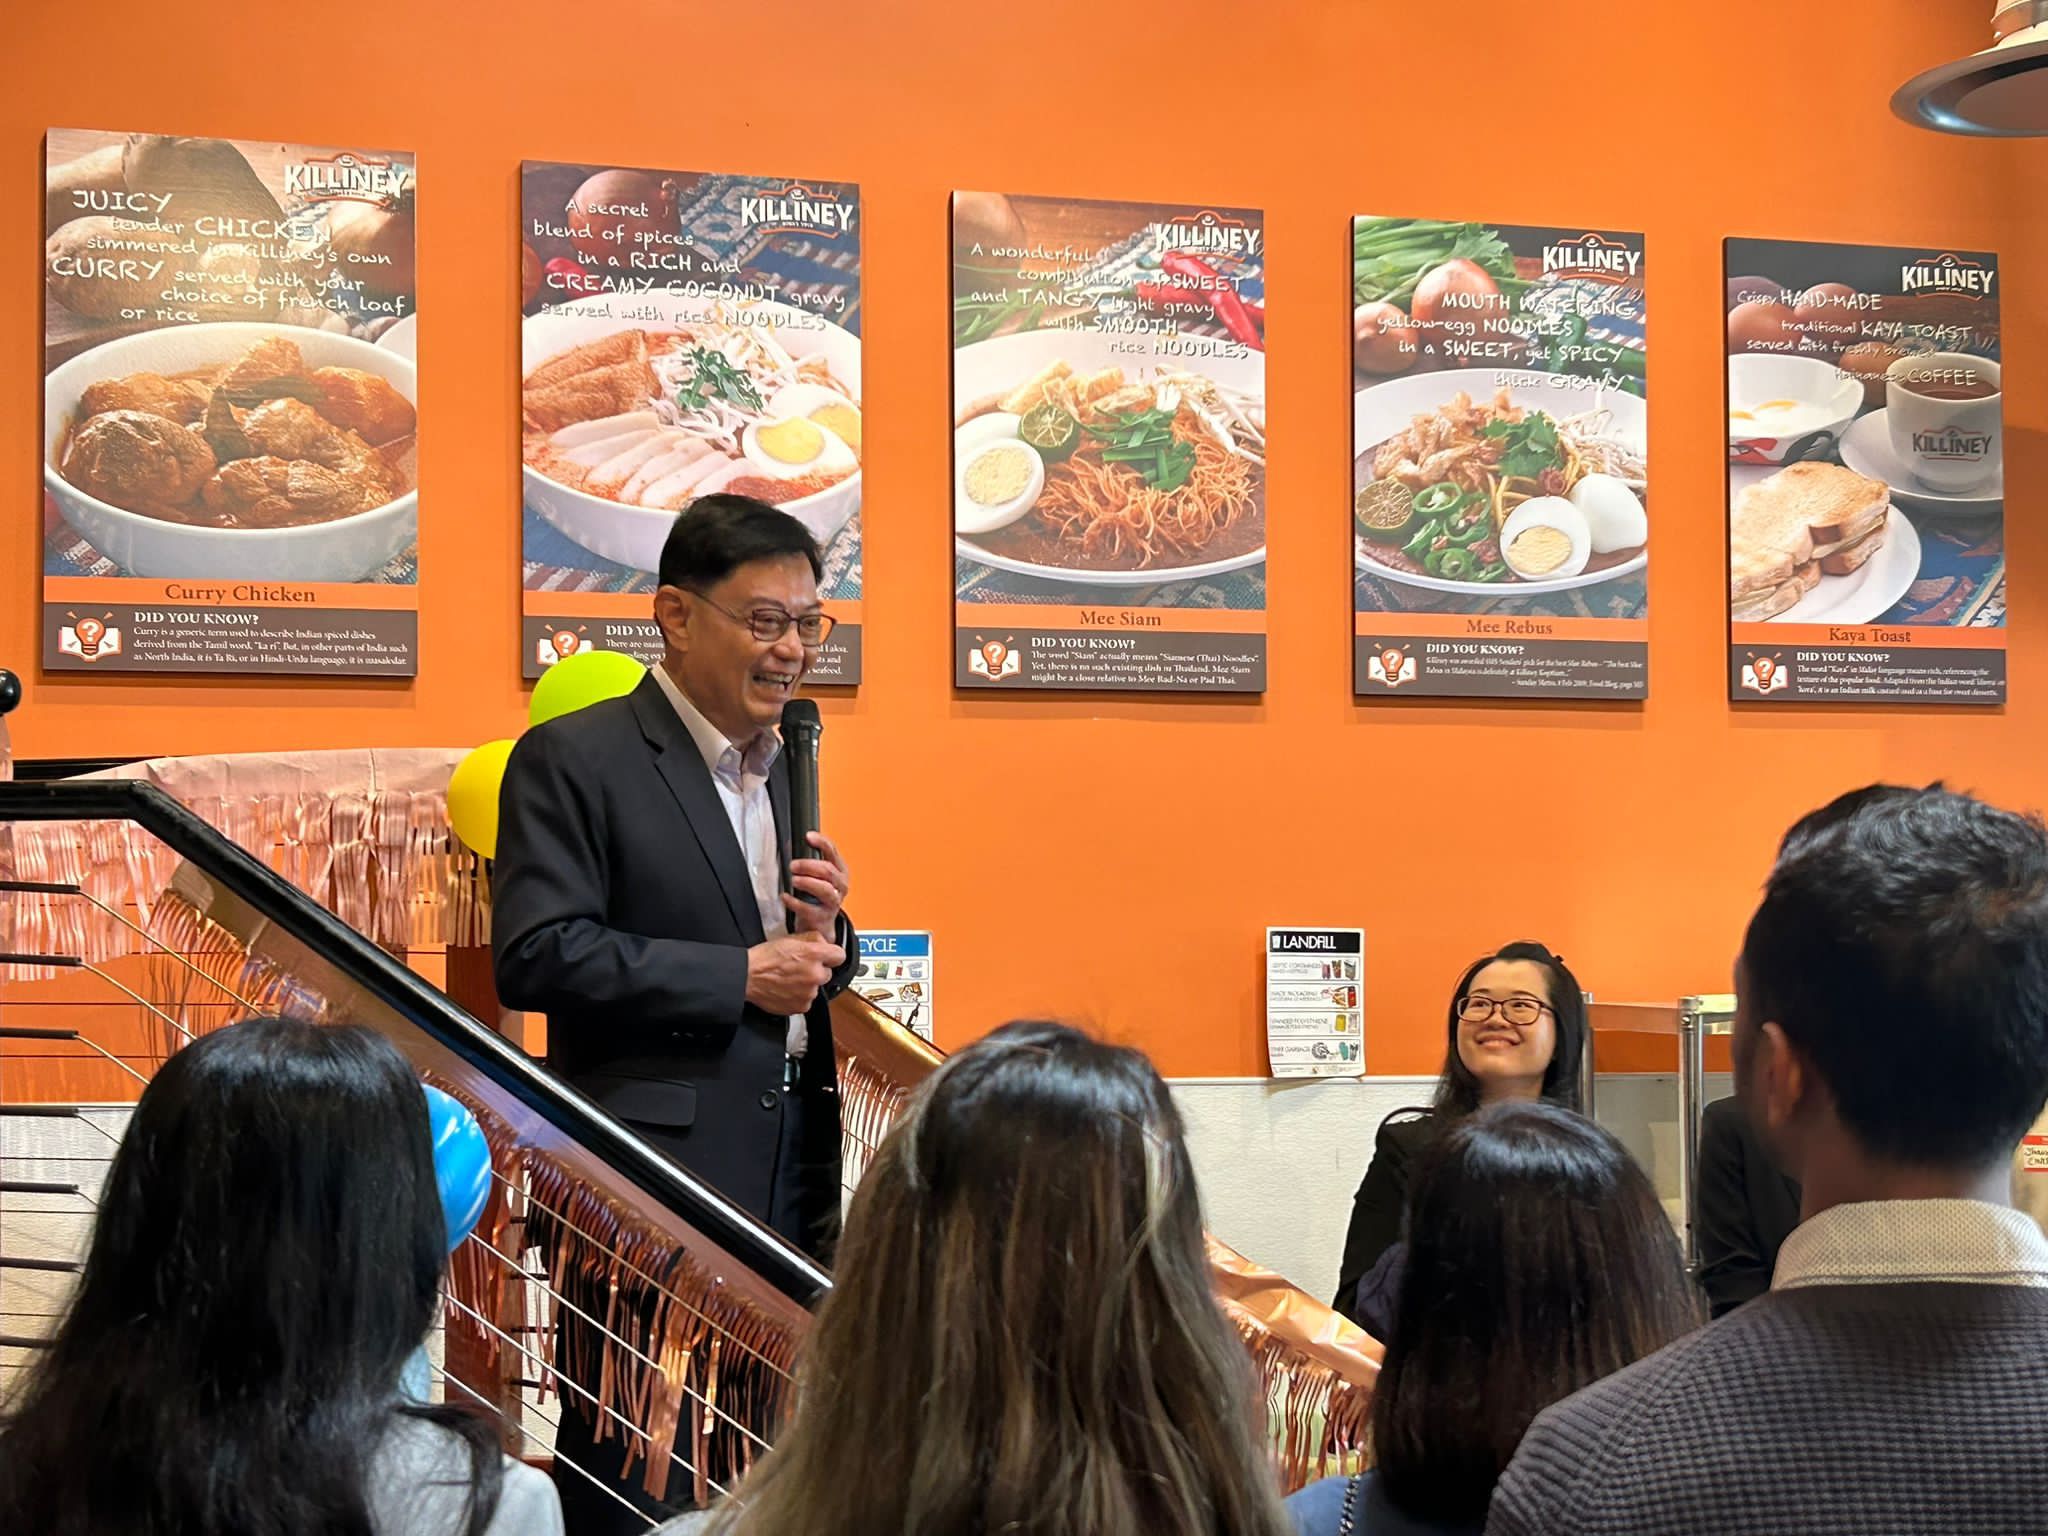 Deputy Prime Minister Heng Swee Keat hosted over 80 Singaporeans at Killiney outlet @USA San Francisco yesterday